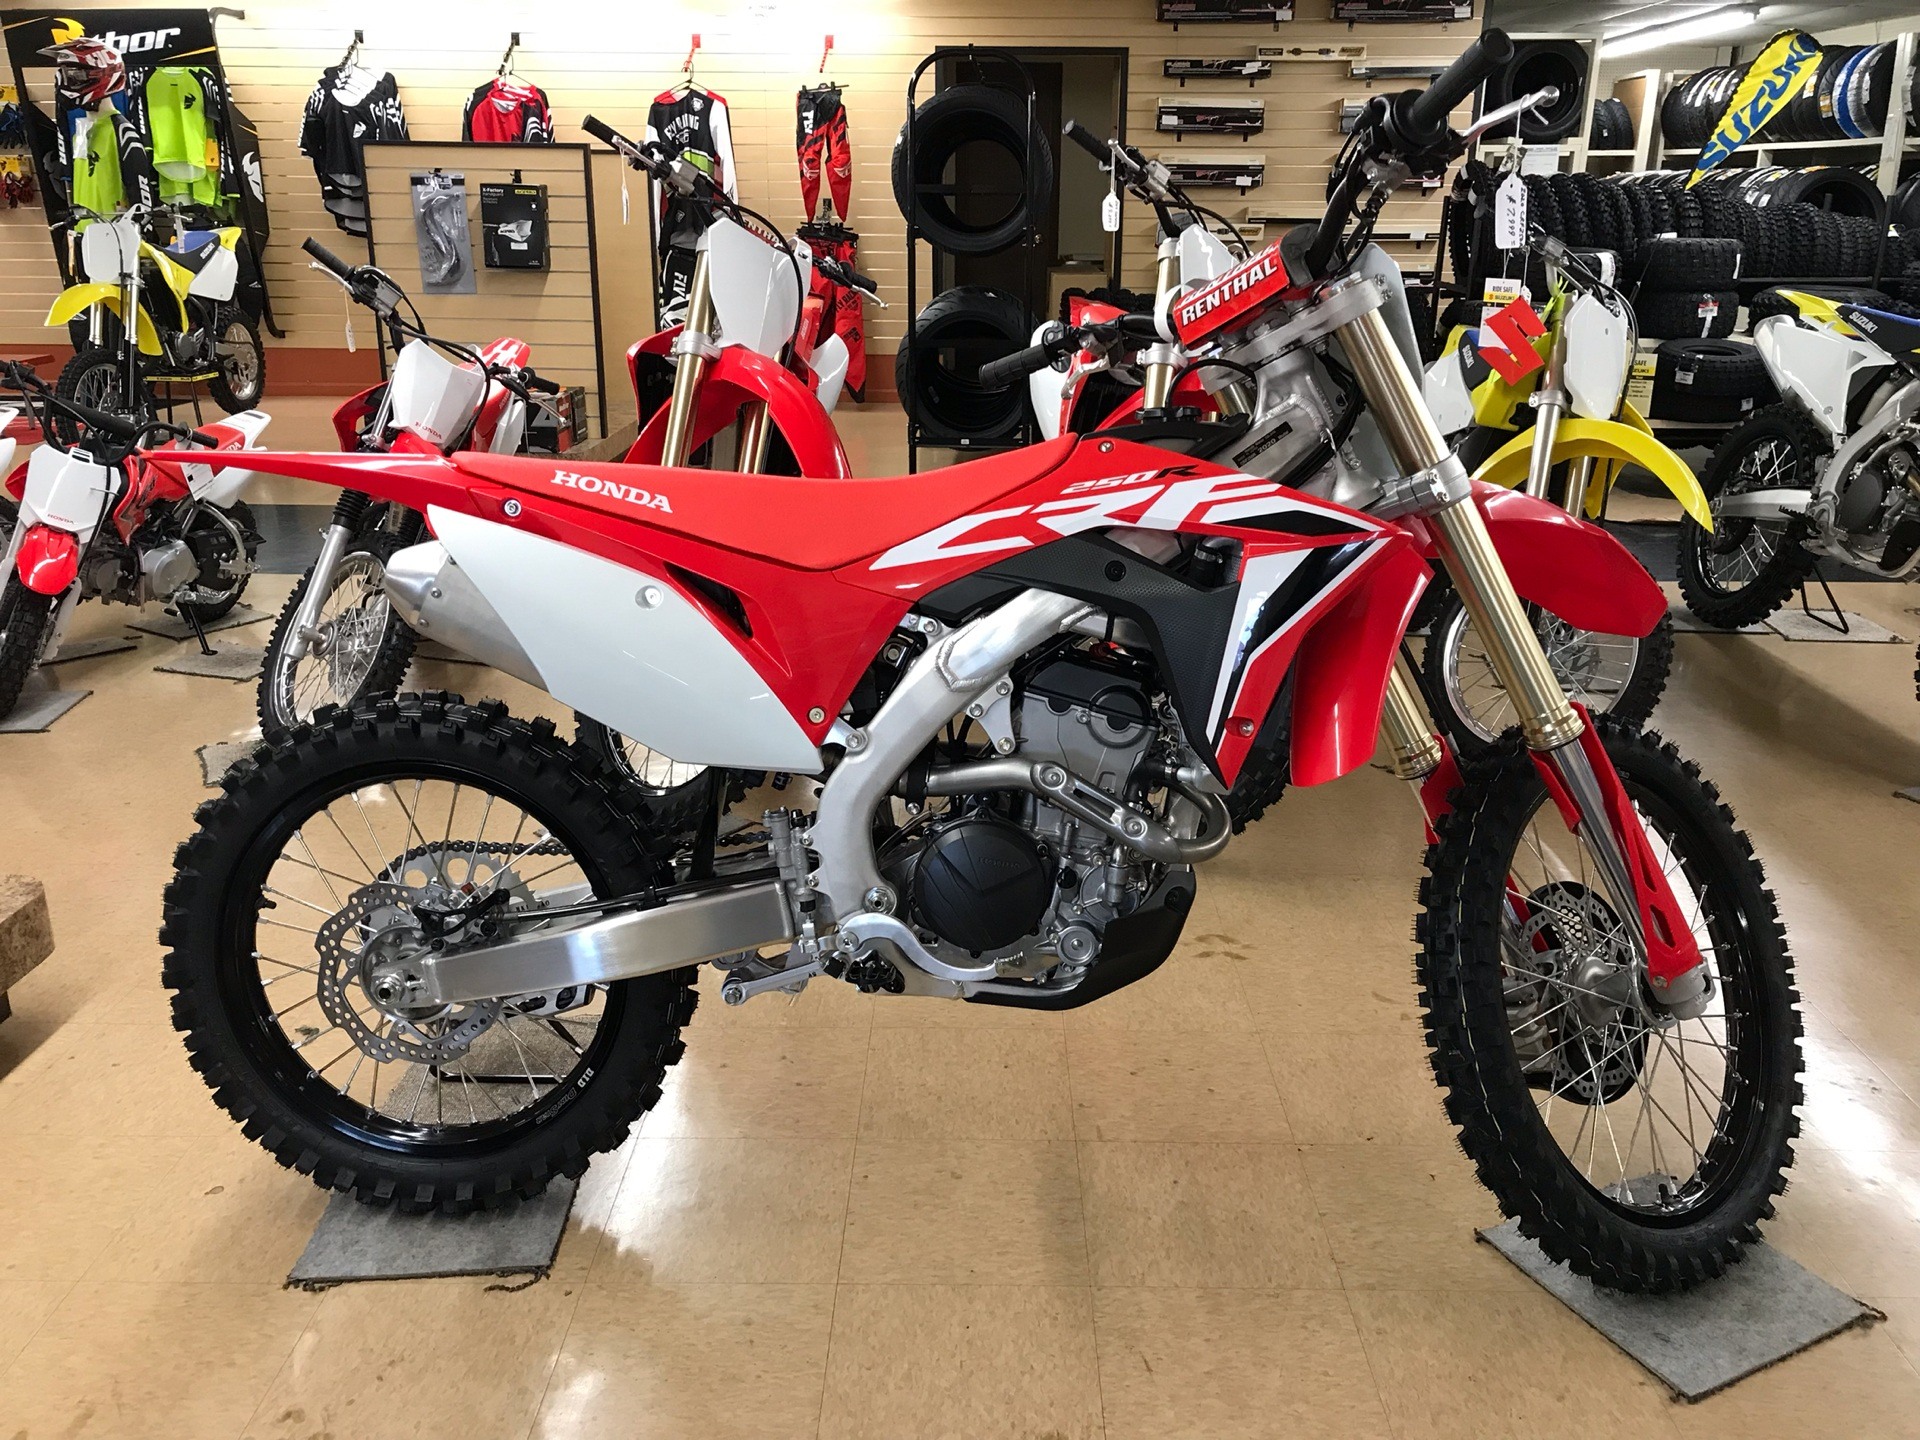 Crf250r Seat Height Lowest Settings Elcho Table